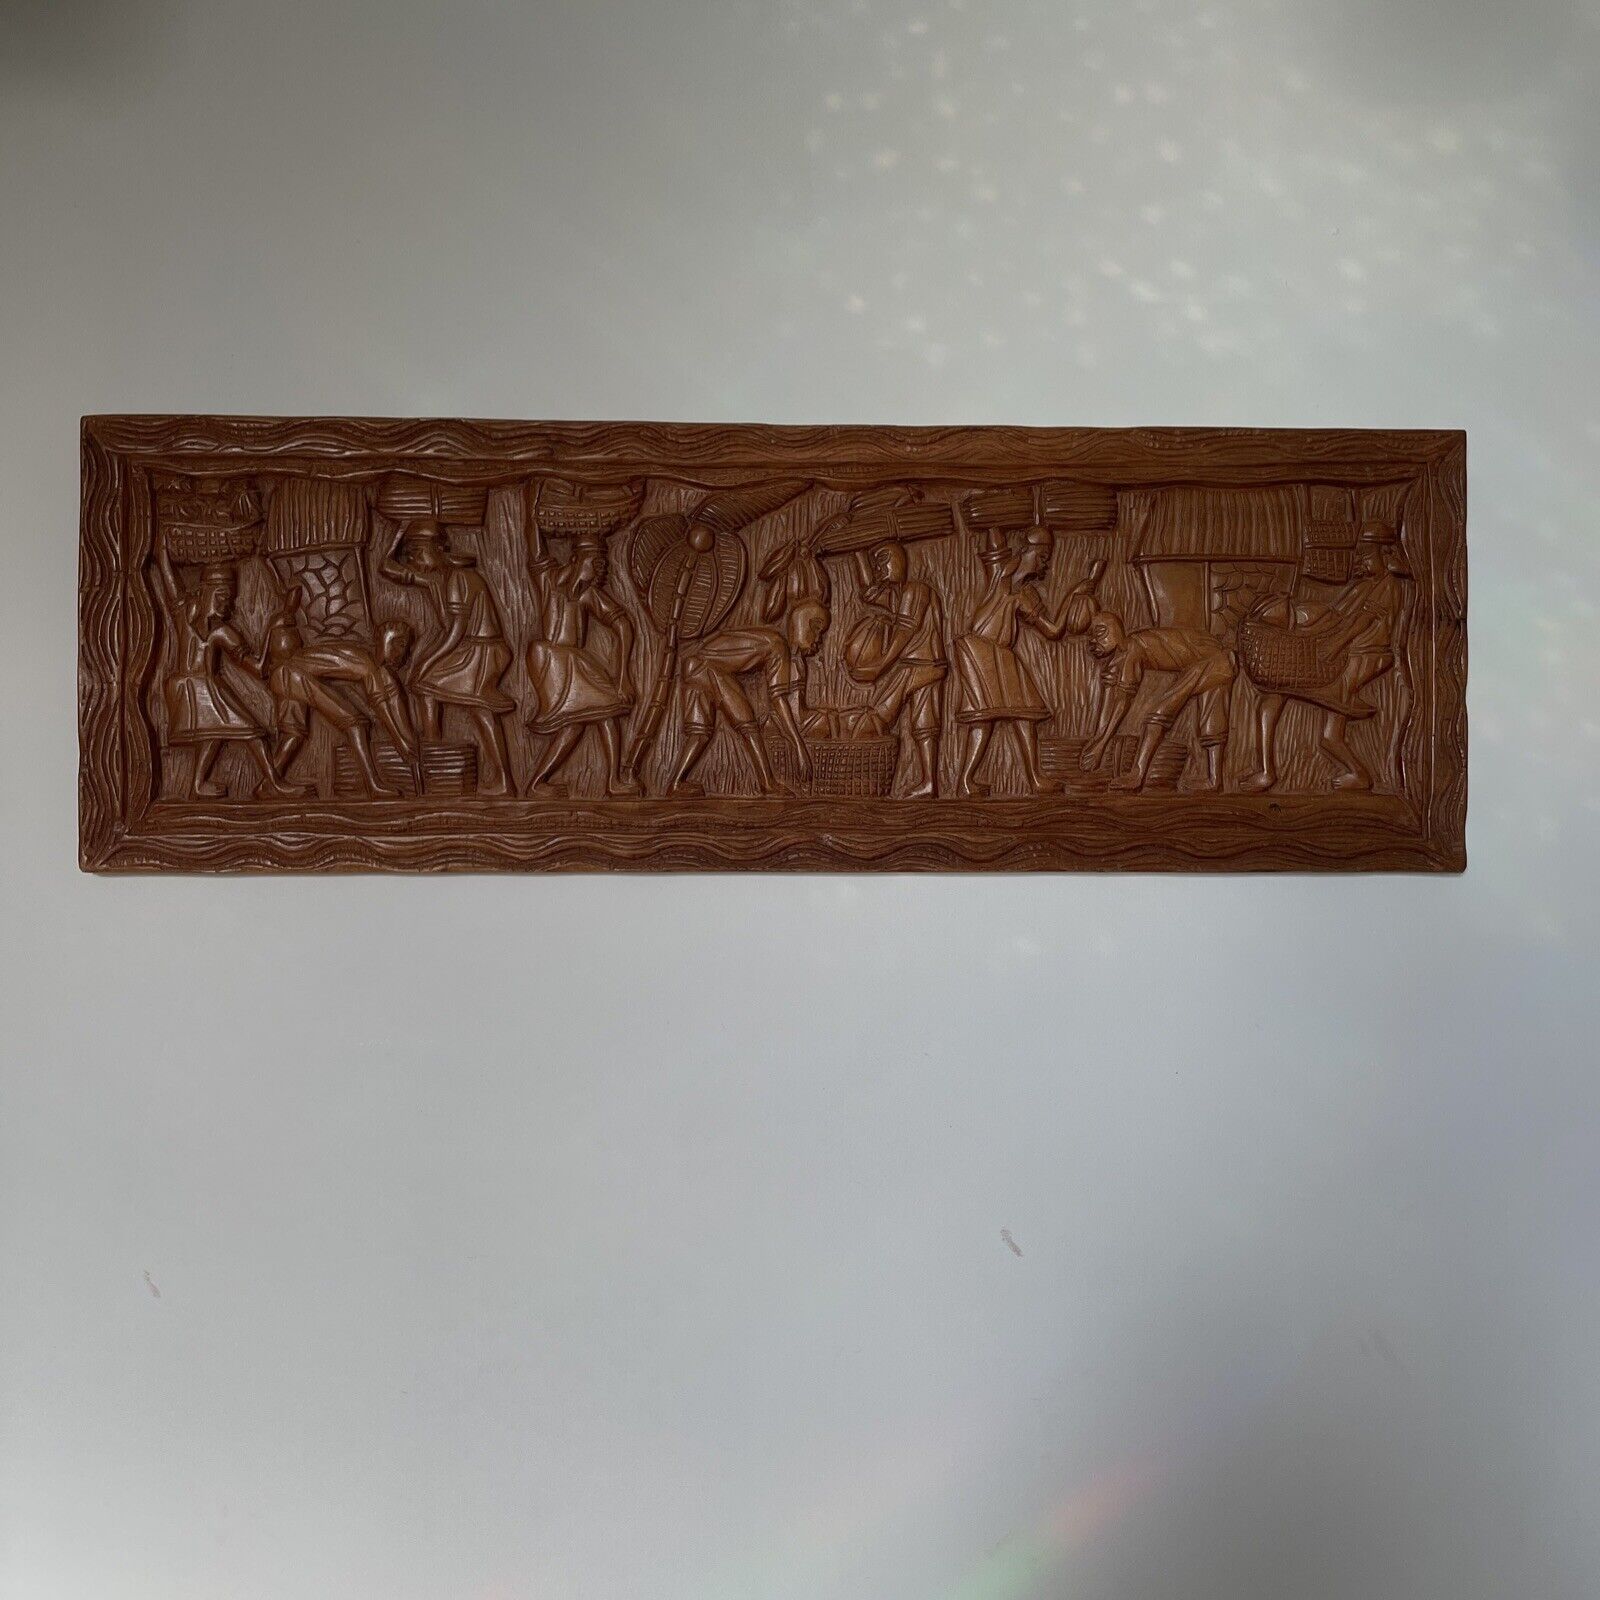 VTG Amazing Wood Carved Art Africans Farmer Scene signed by artist LOUIS